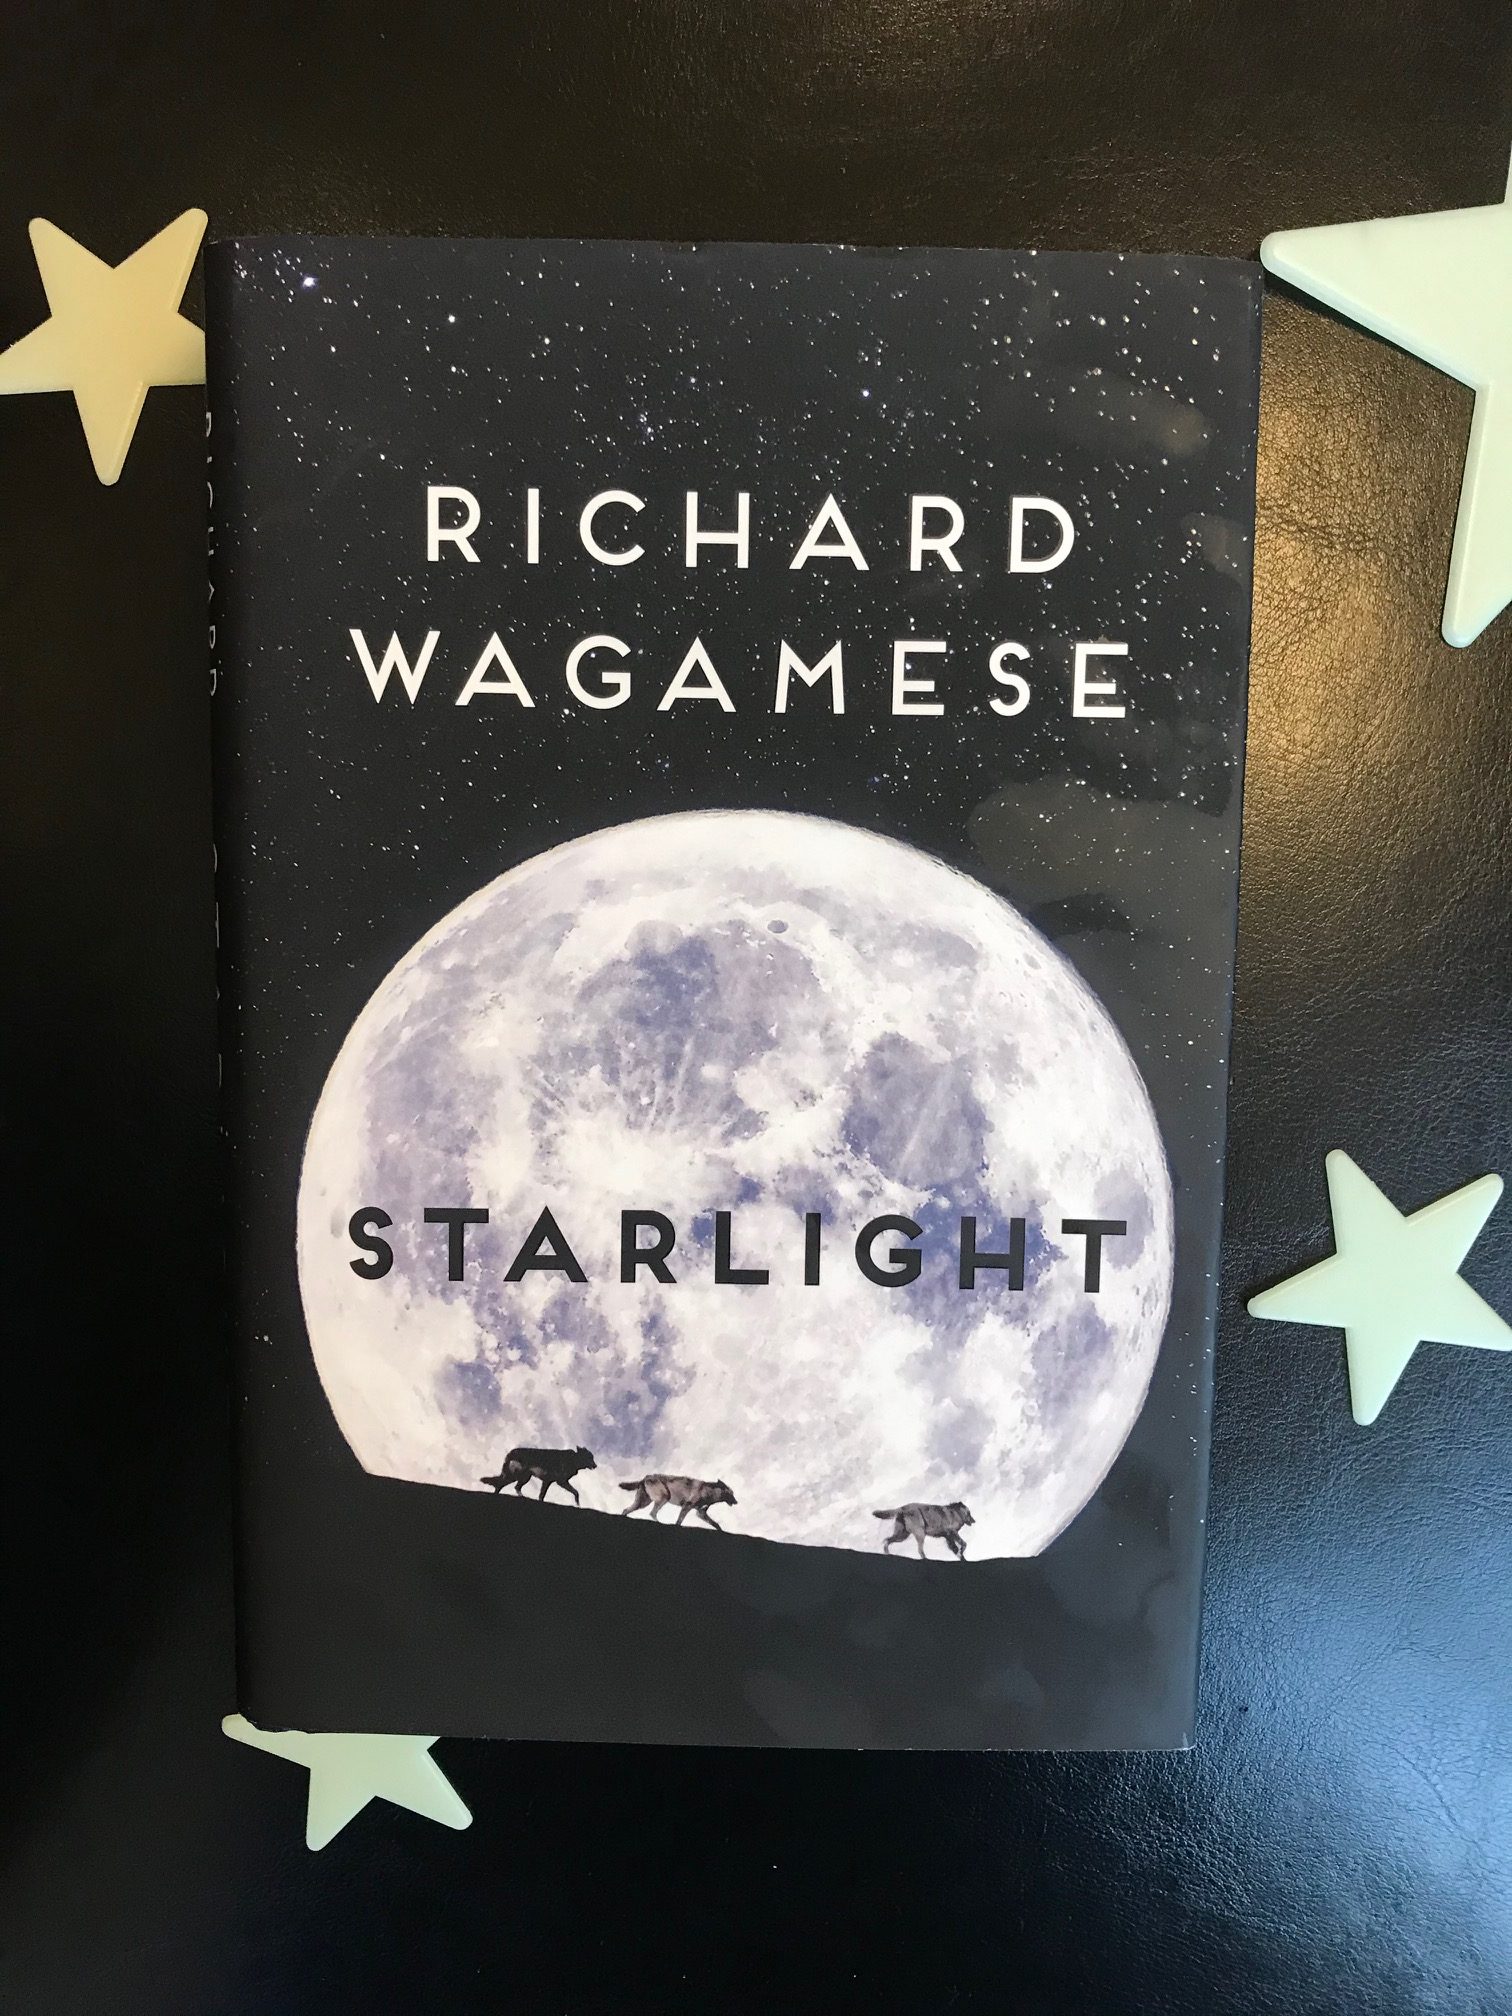 Starlight by Richard Wagamese book pictured on a black background with white plastic glow-in-the-dark stars surrounding it